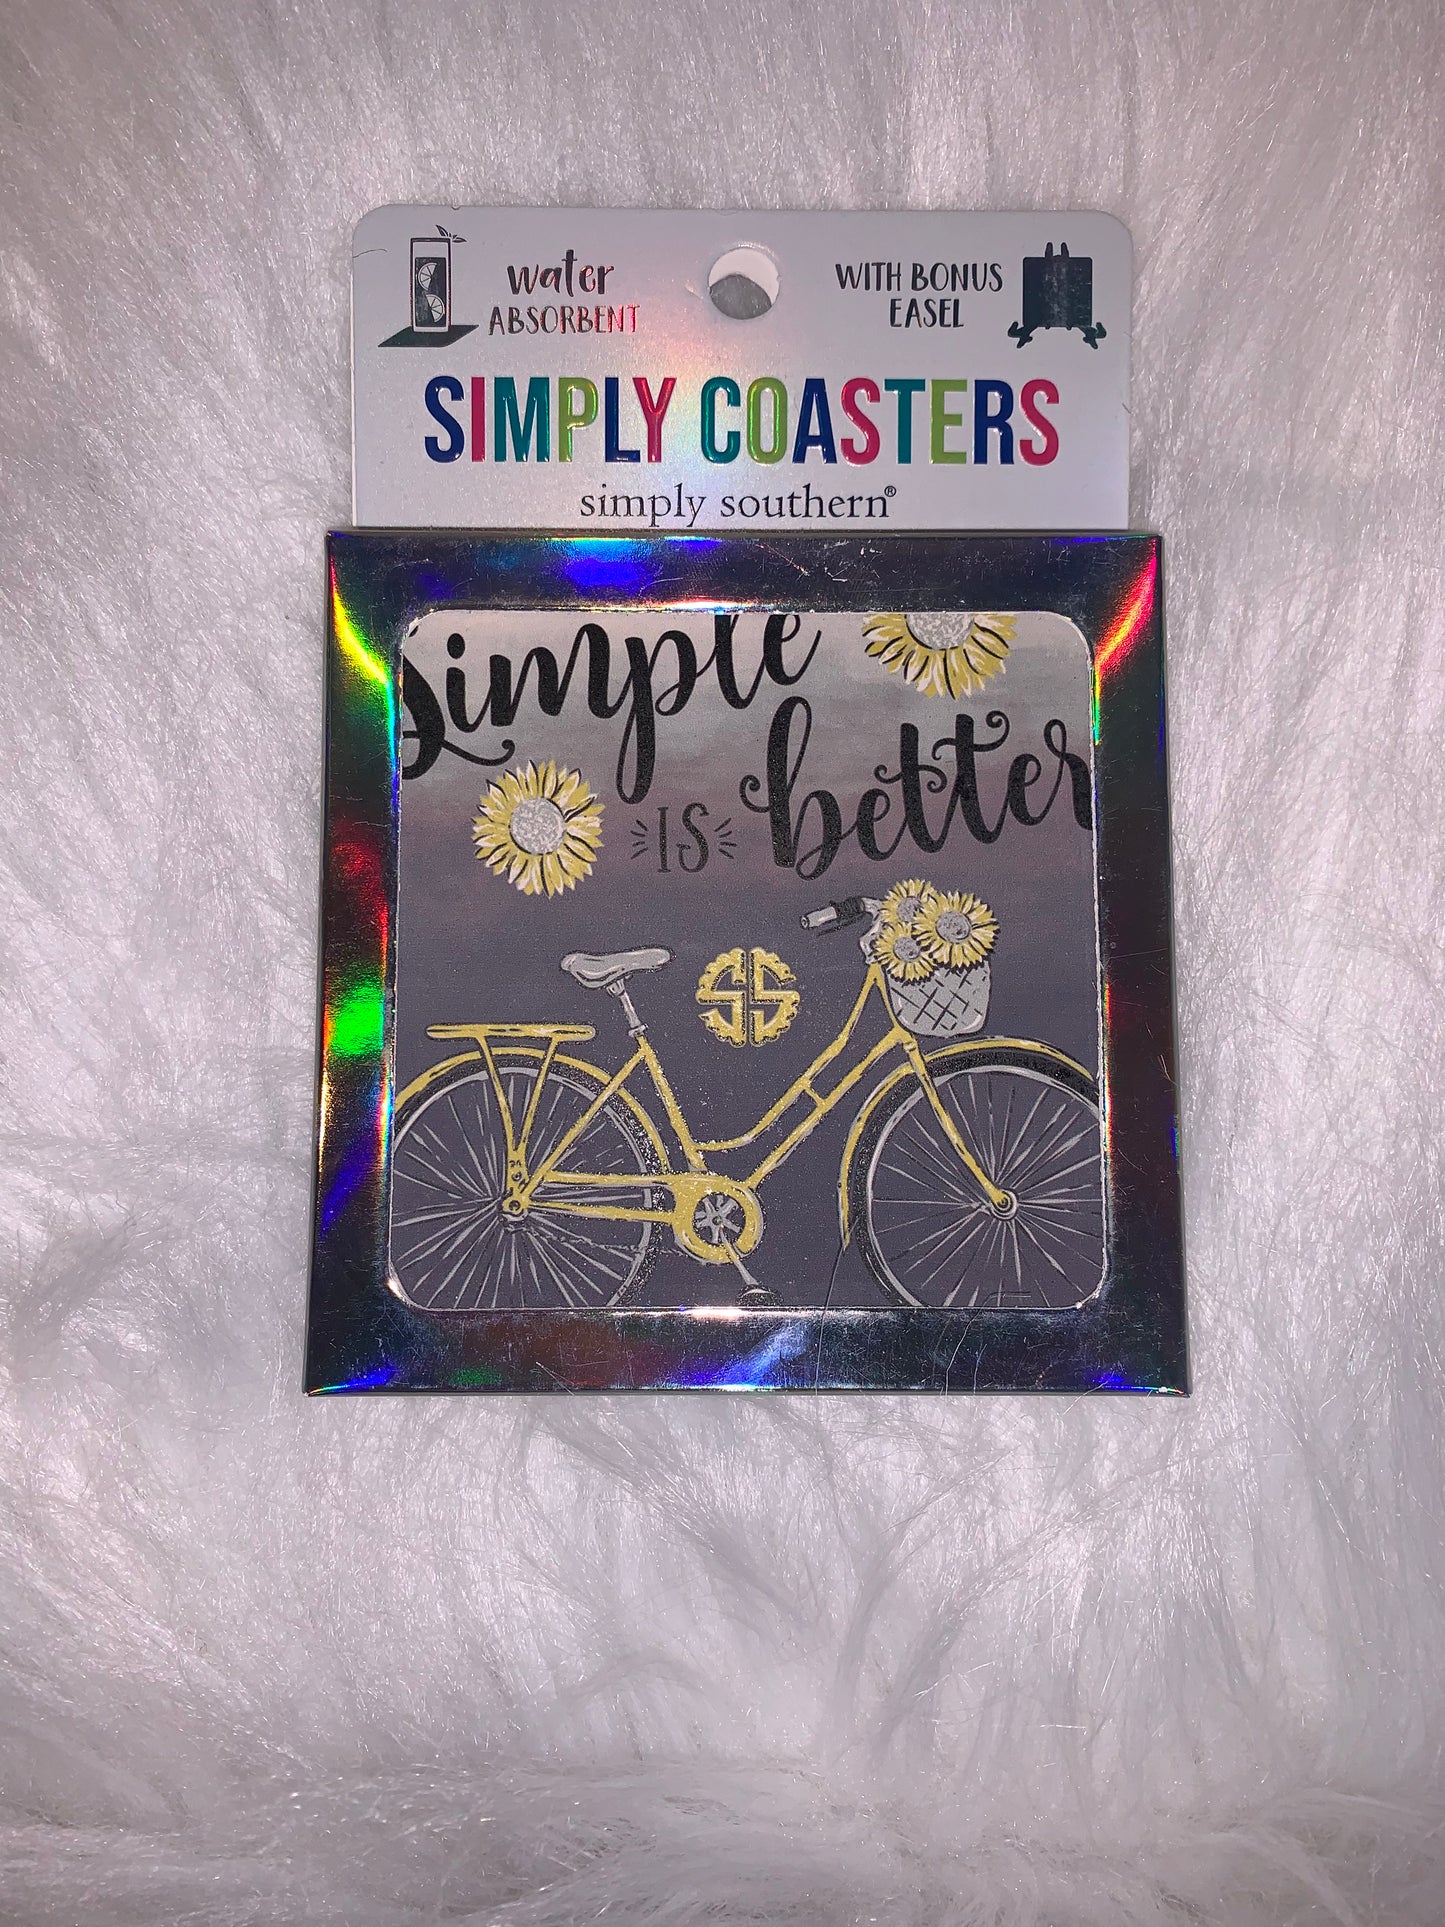 * Simply Coaster from Simply Southern